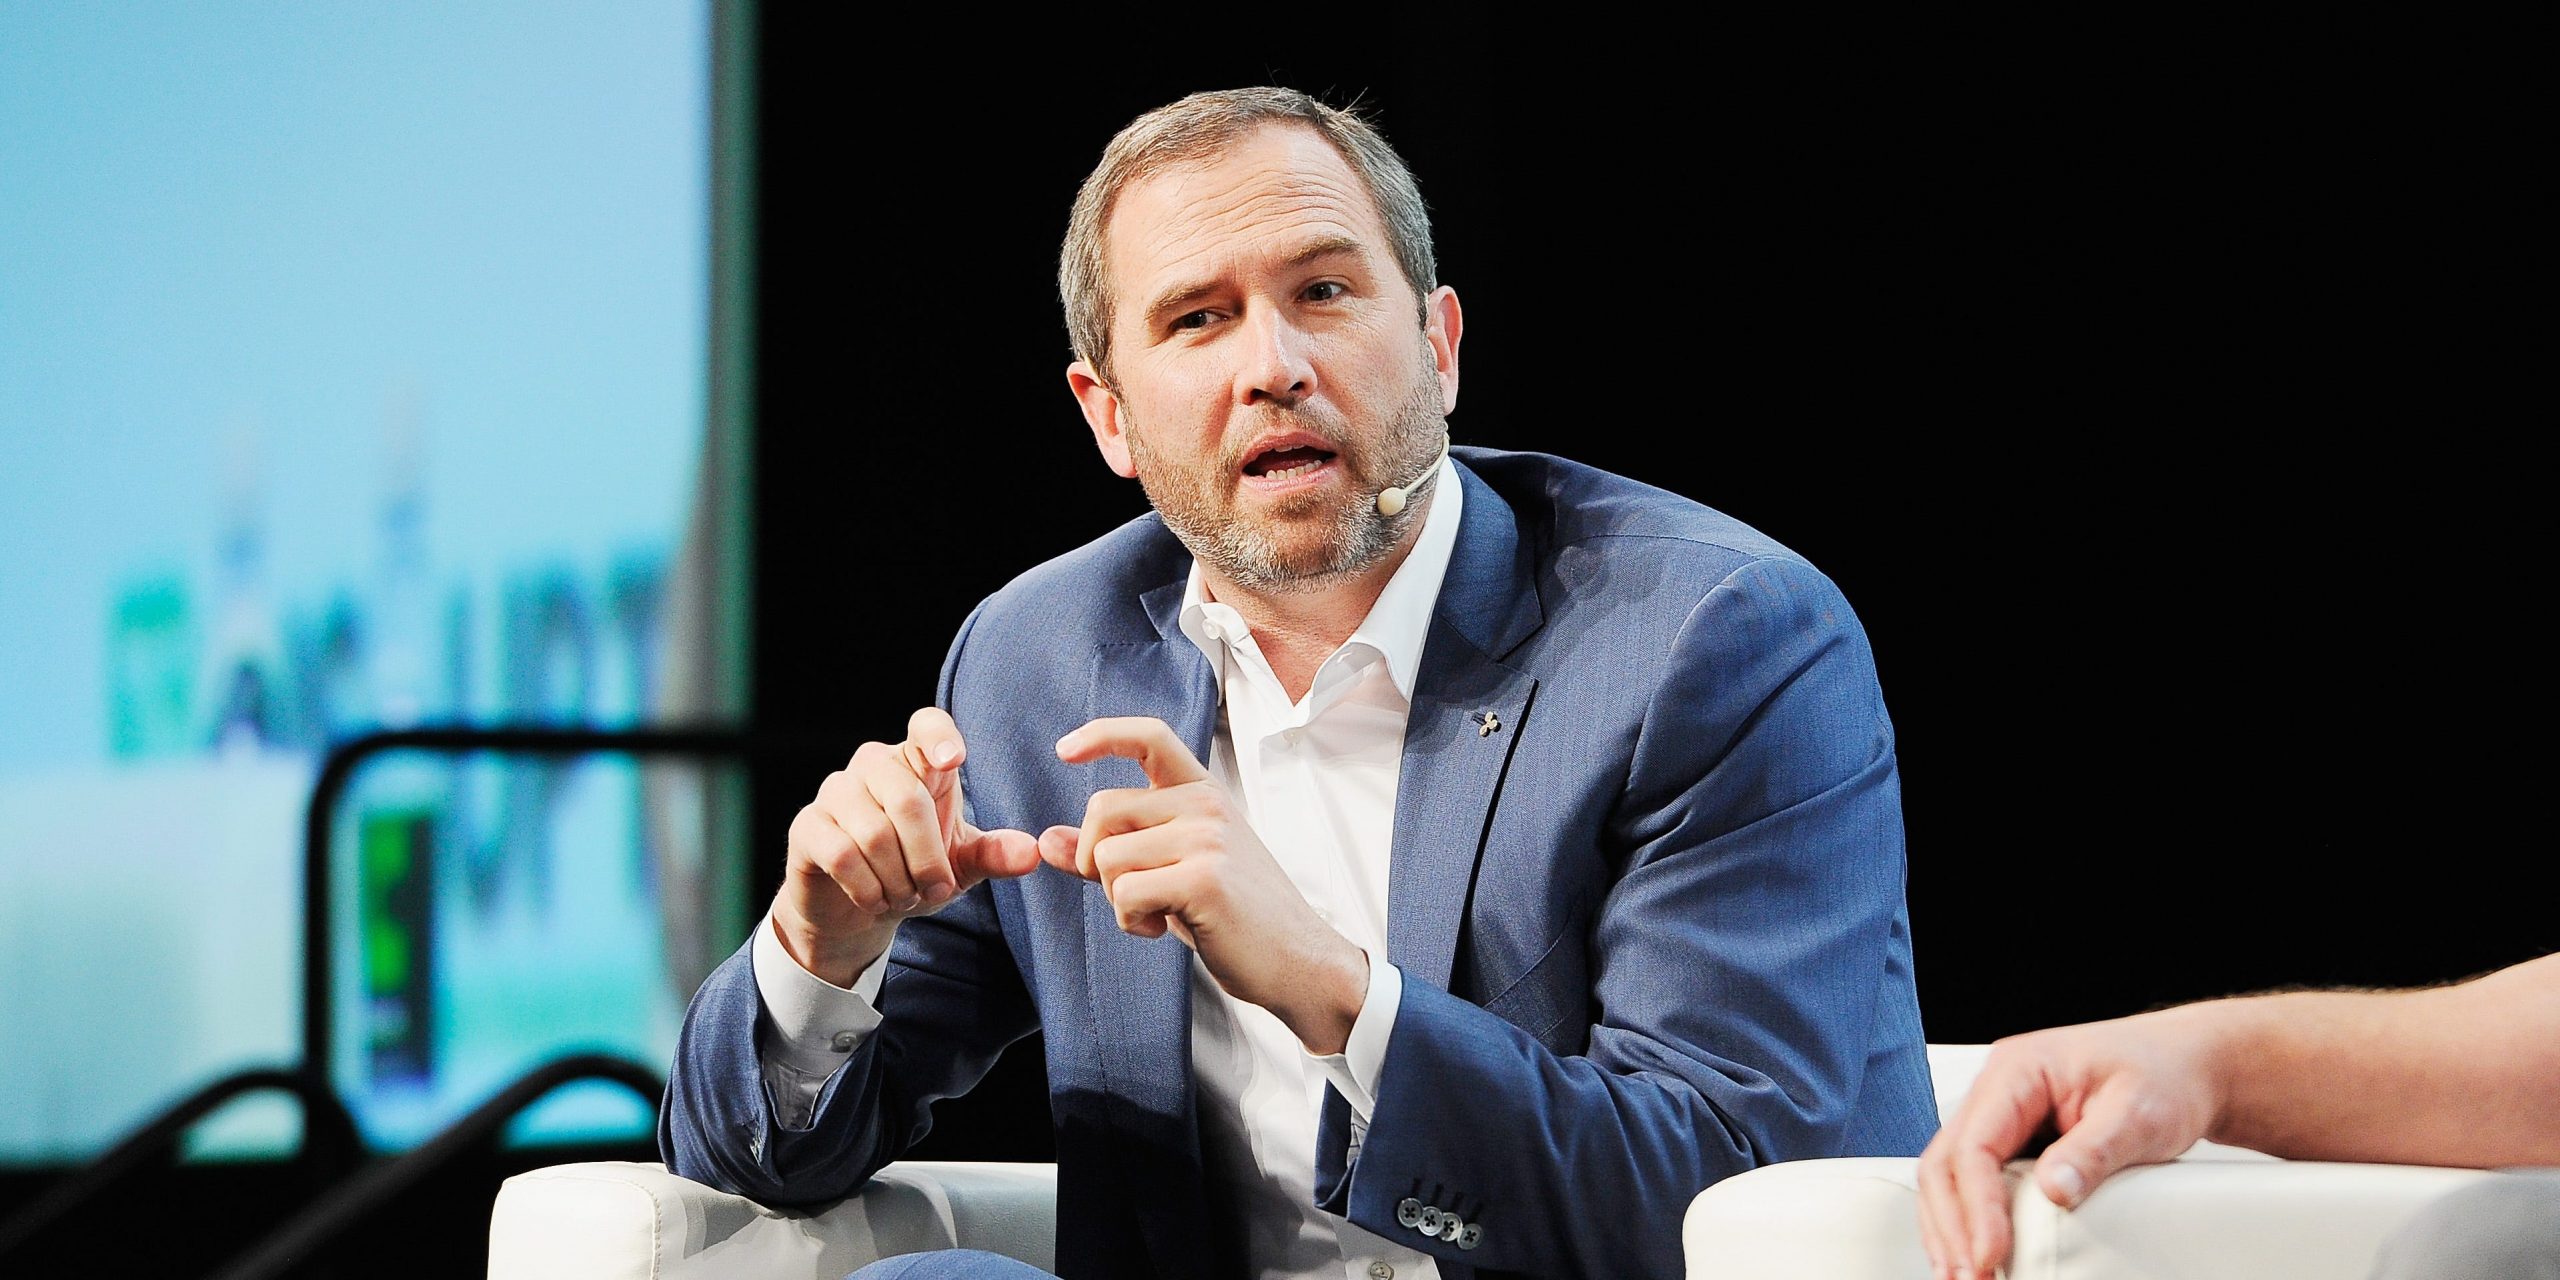 Ripple CEO Brad Garlinghouse speaks onstage at the Moscone Center in San Francisco.